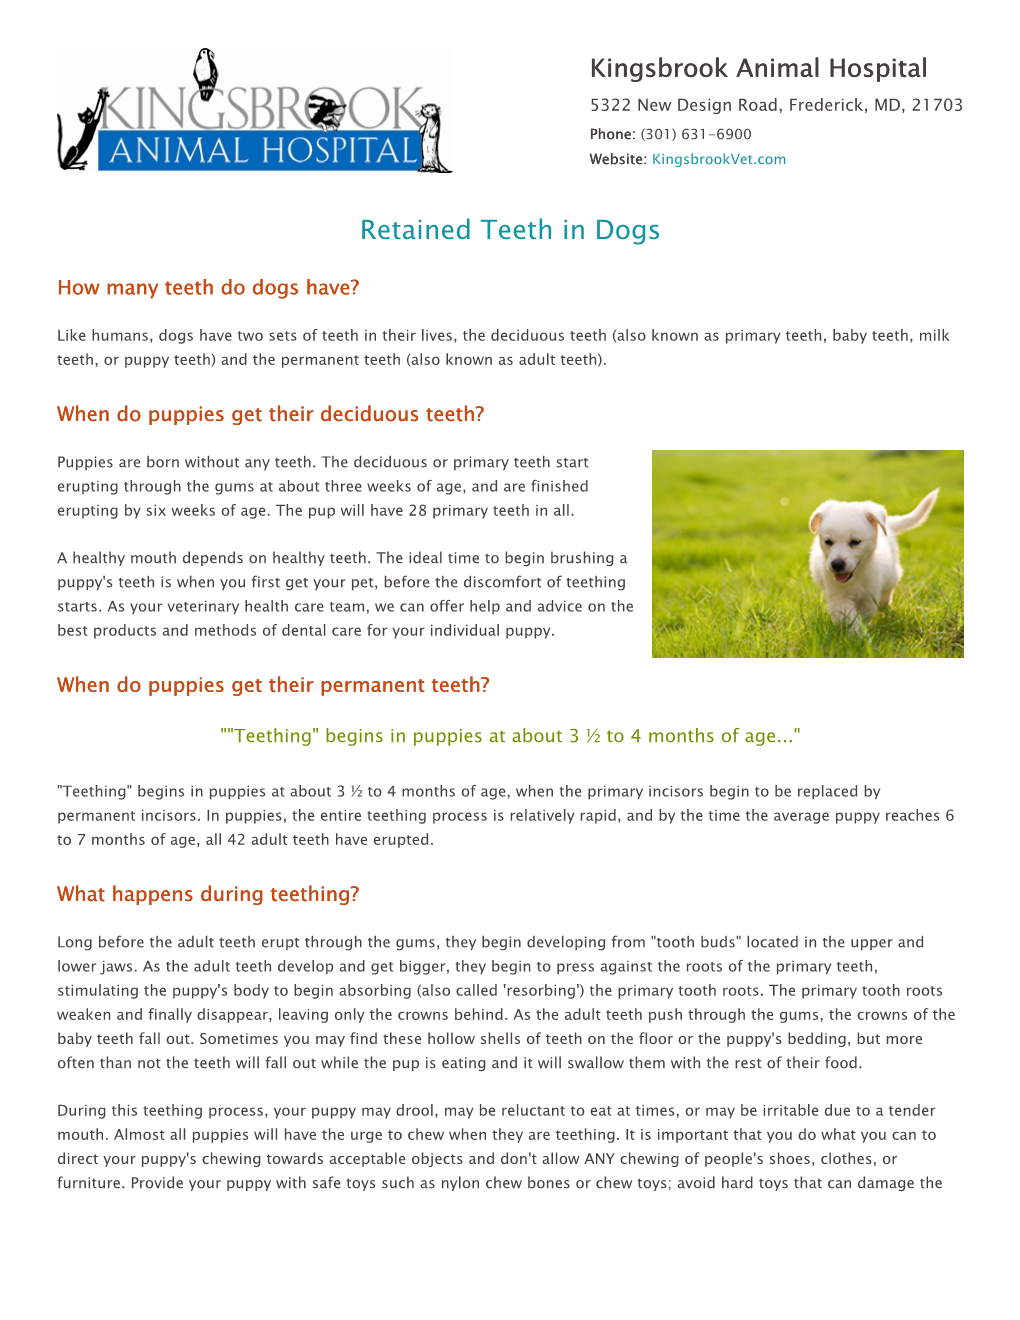 Retained Teeth in Dogs